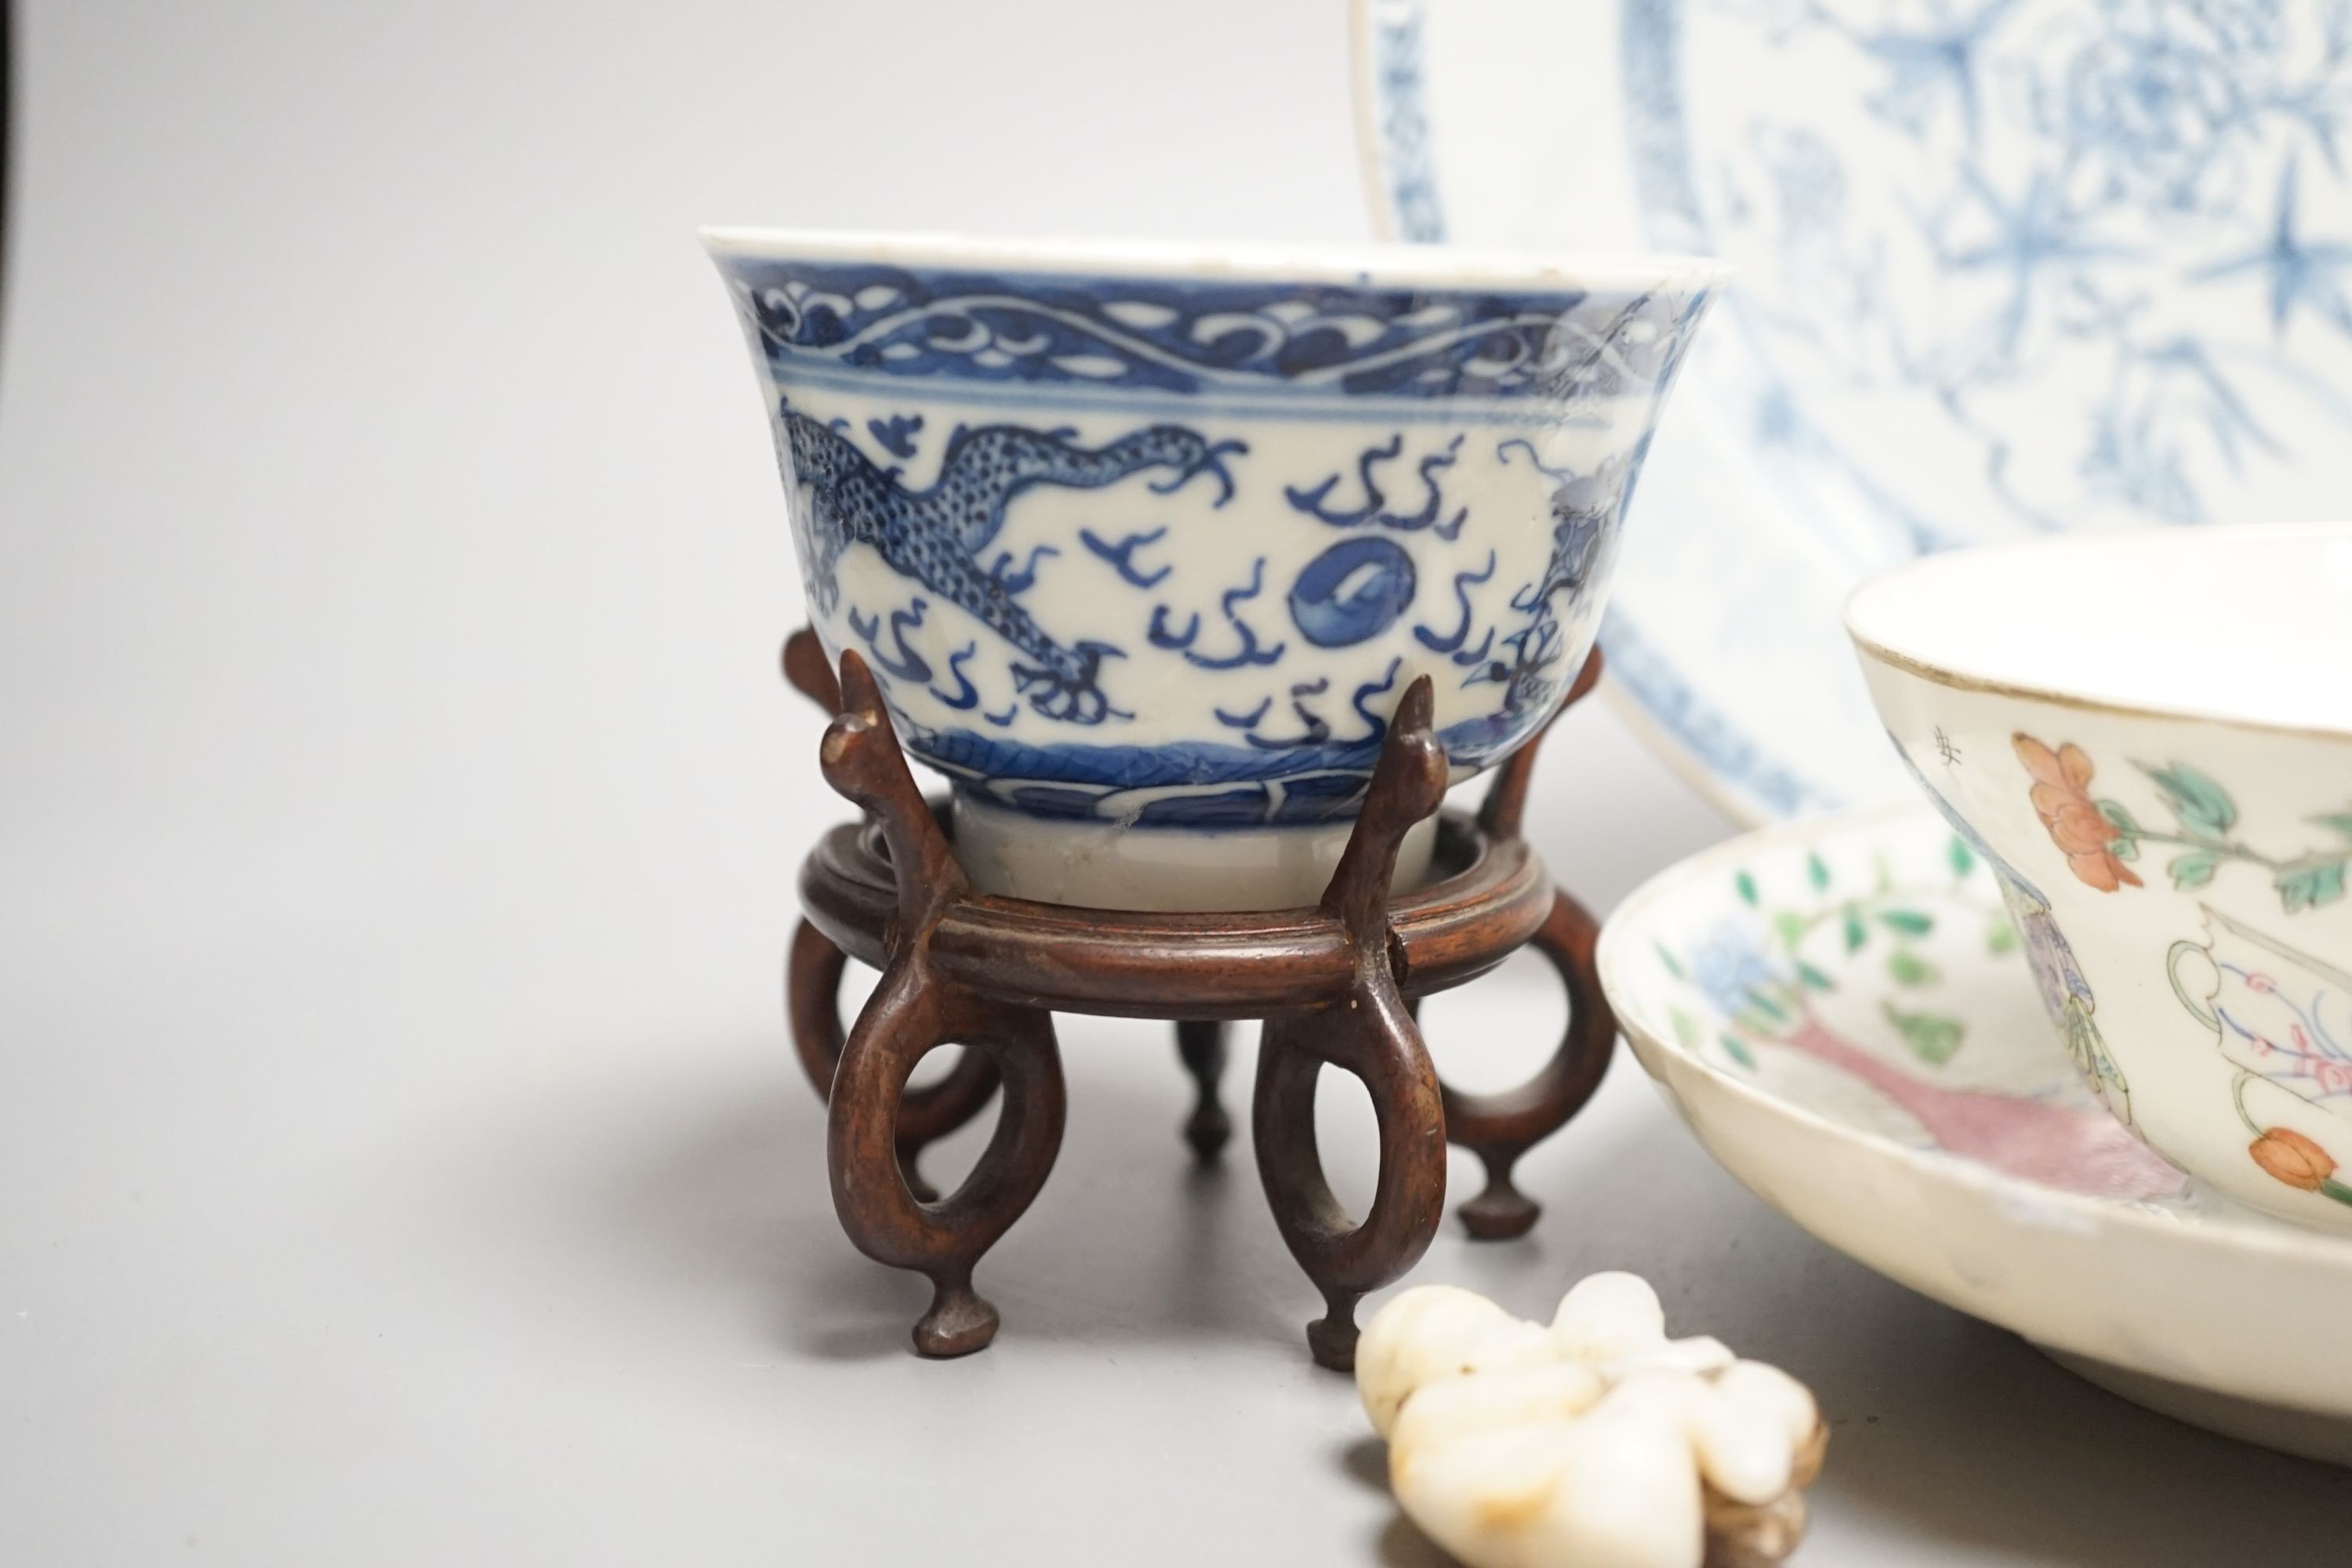 A 19th century Chinese famille rose bowl and saucer, a blue and white tea bowl on stand, a hardstone carving and three 18th century blue and white plates